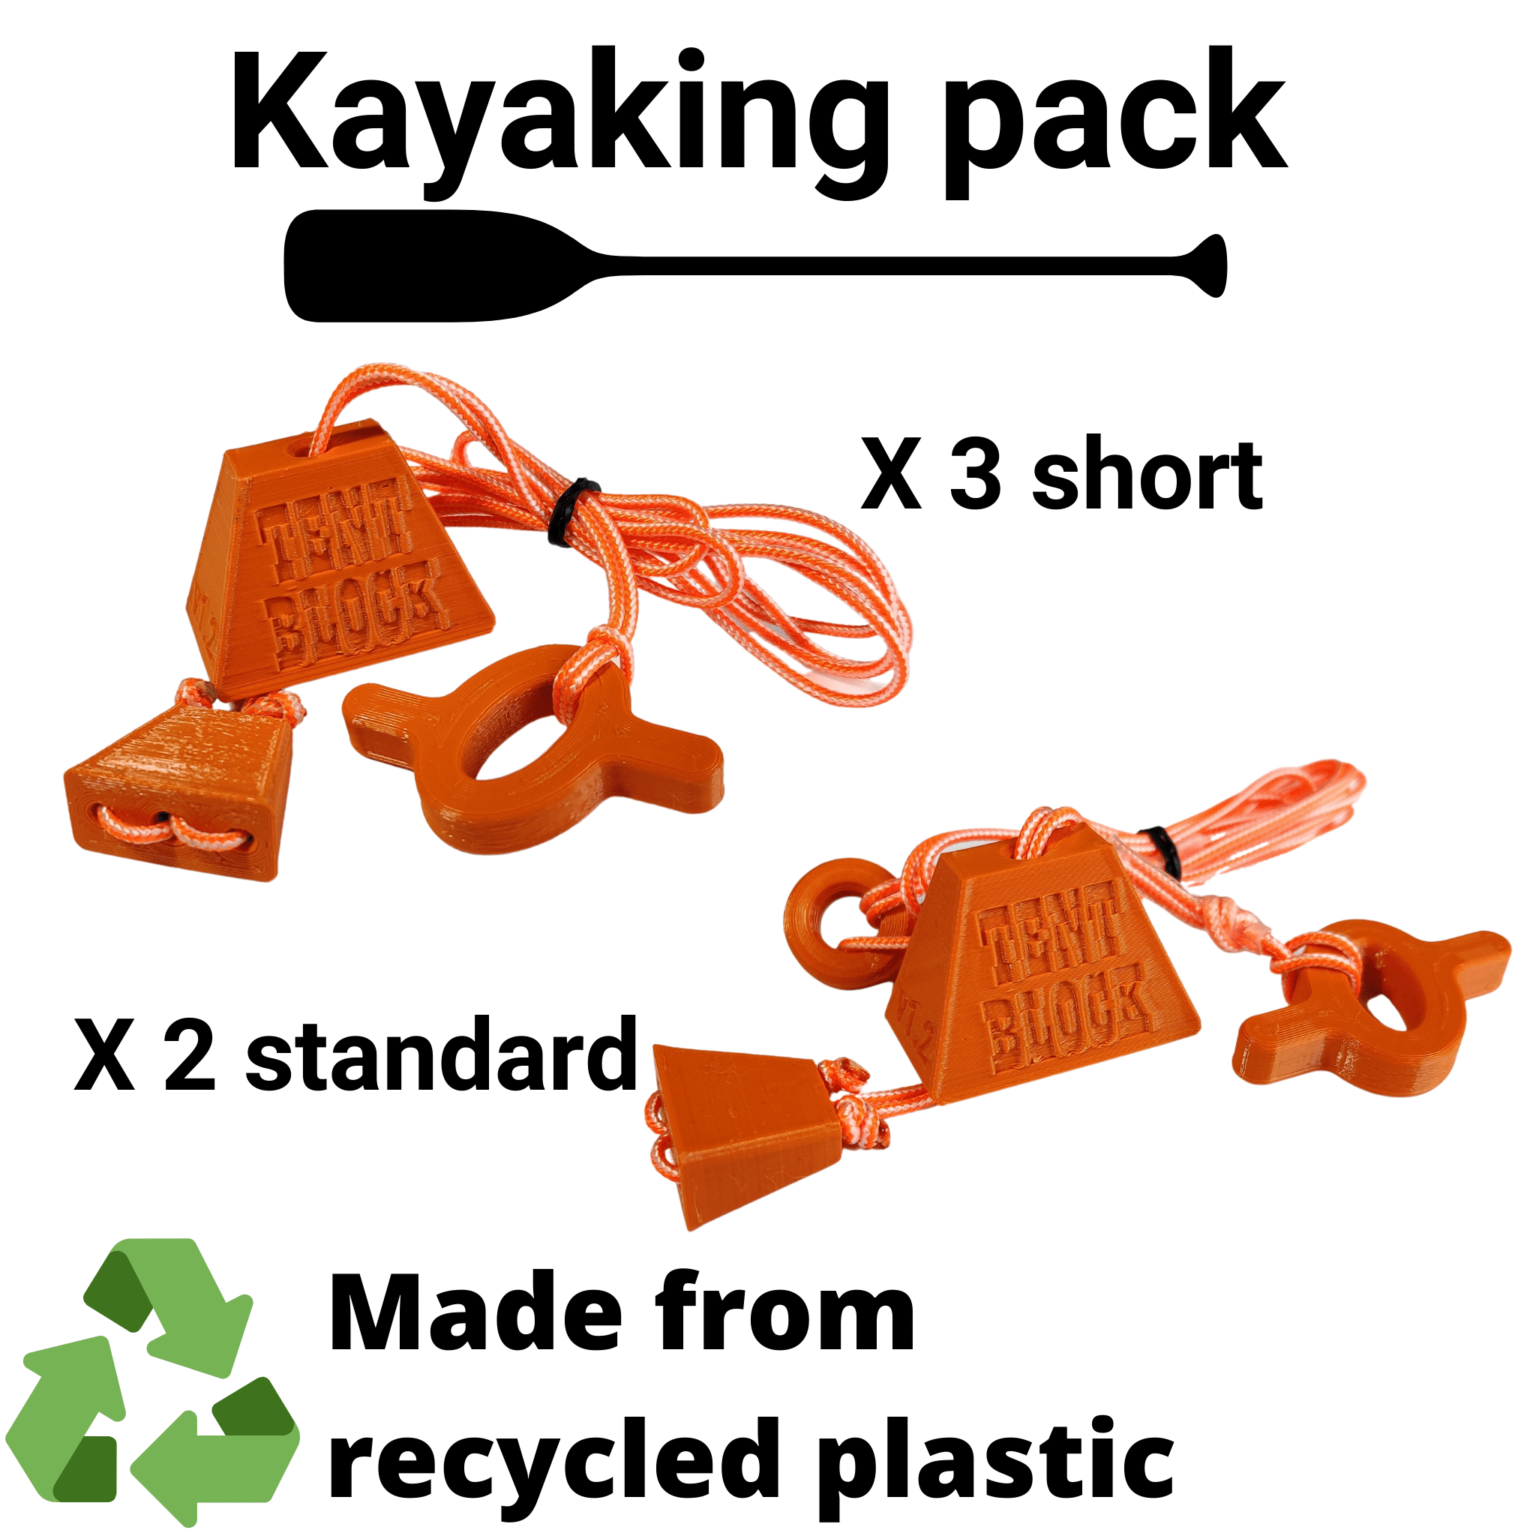 Tent Block Kayaking Pack is a value pack of standard and short anchors for kayaking adventures